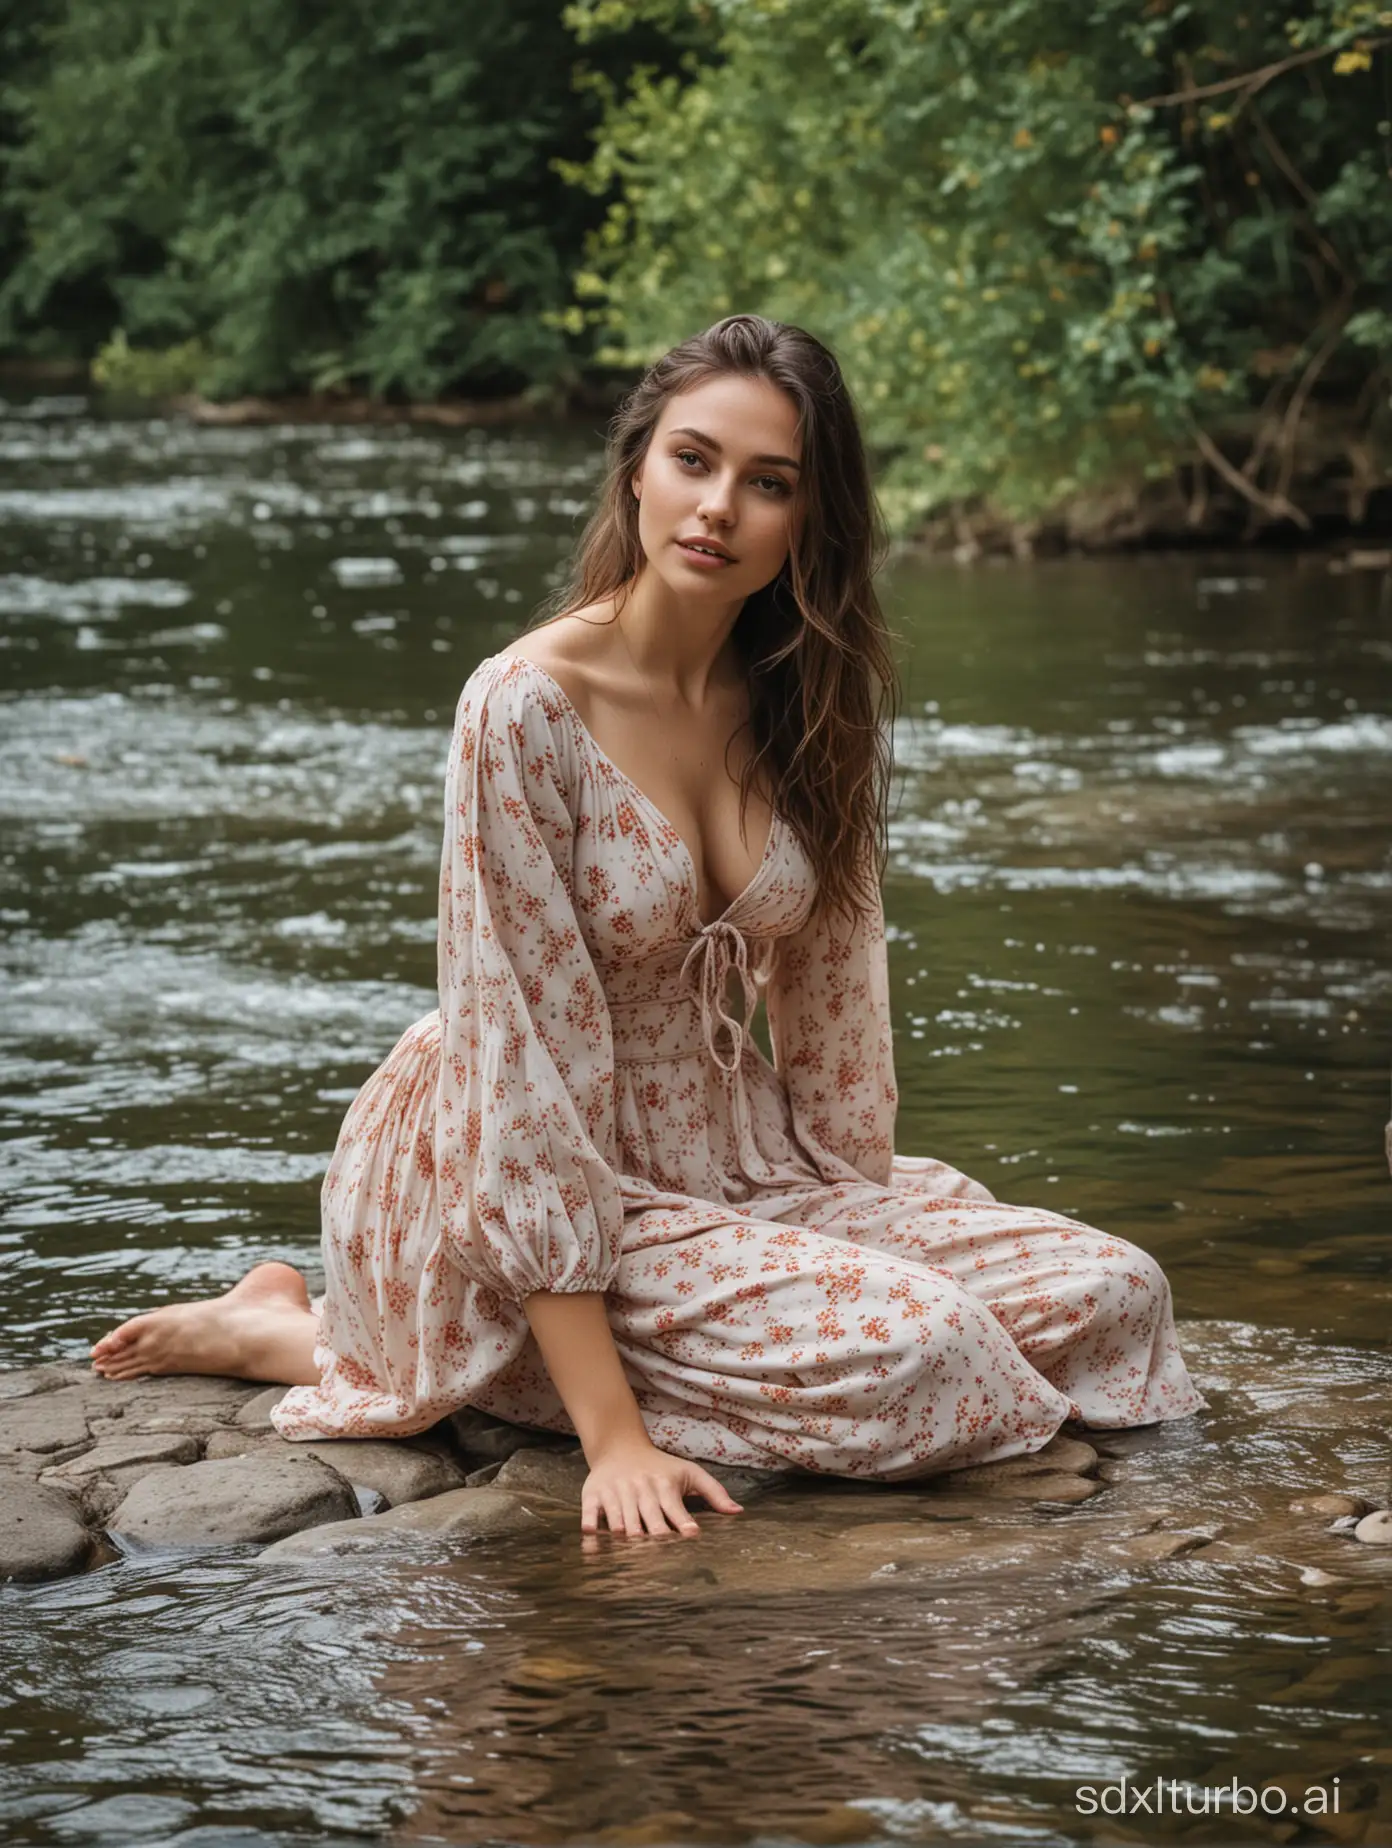 A beauty sits by the river playing in the water